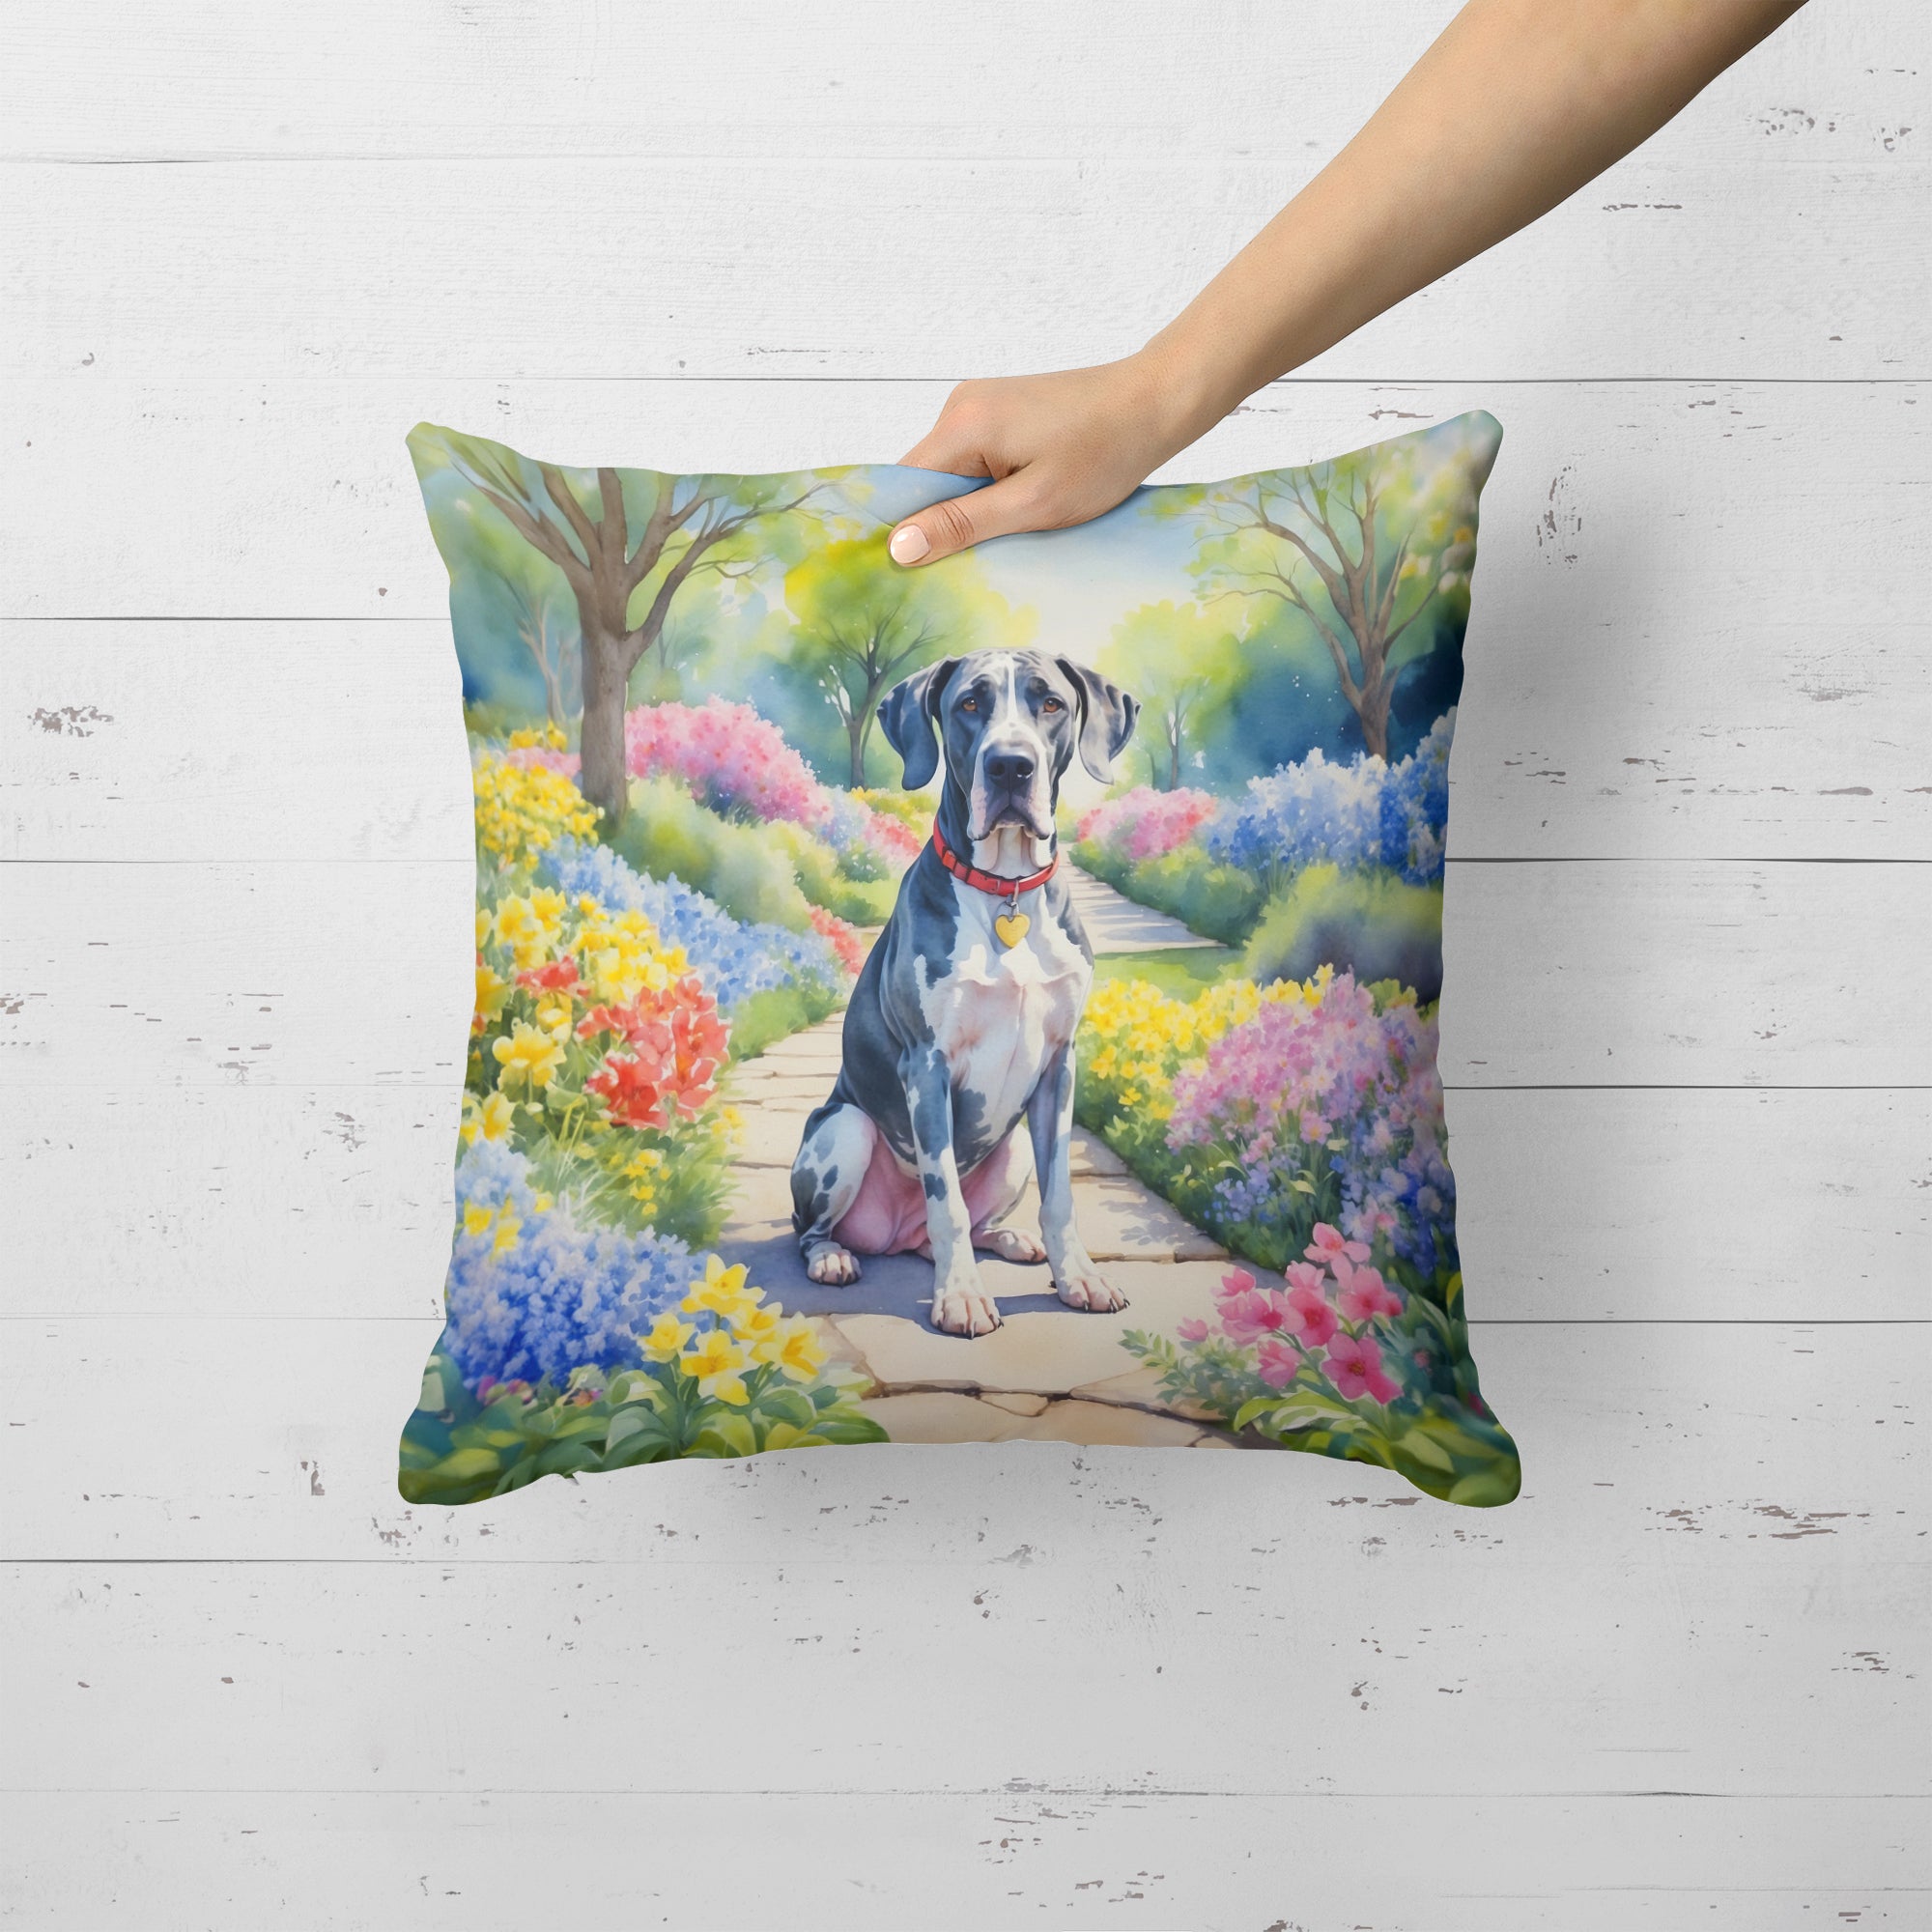 Buy this Great Dane Spring Path Throw Pillow